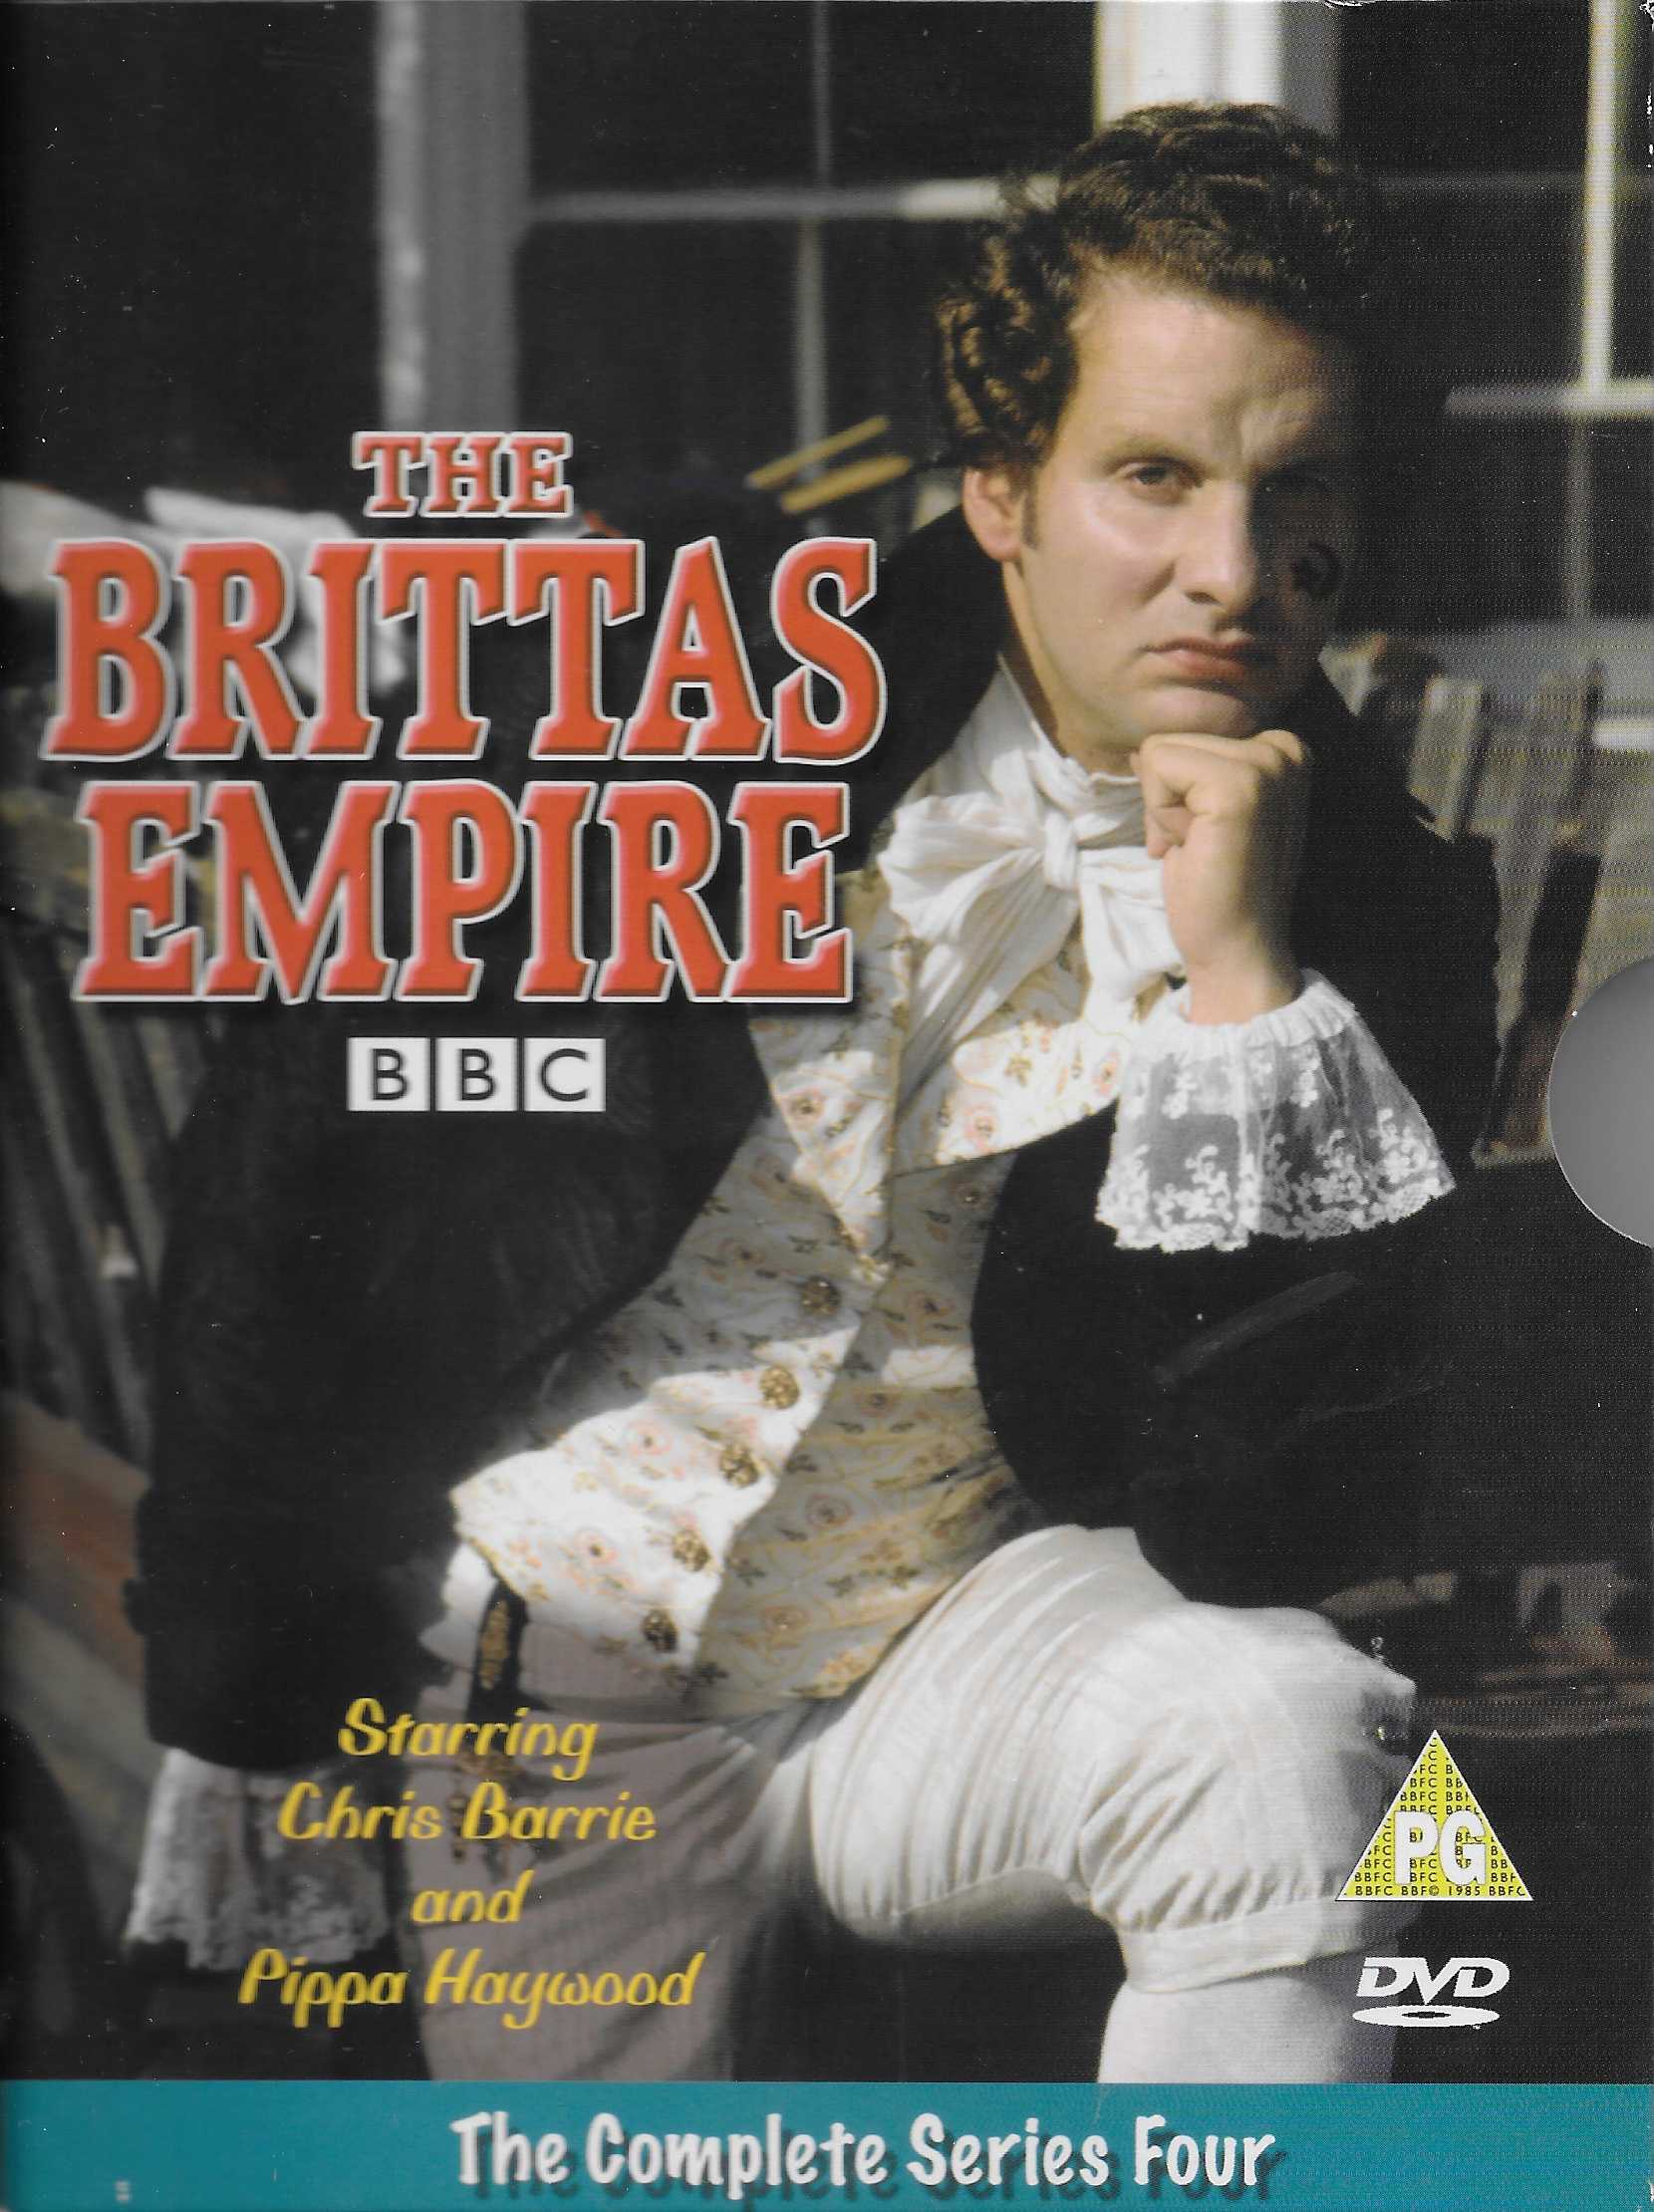 Picture of The Brittas empire - Series 4 by artist Richard Fegen / Andrew Norriss from the BBC dvds - Records and Tapes library